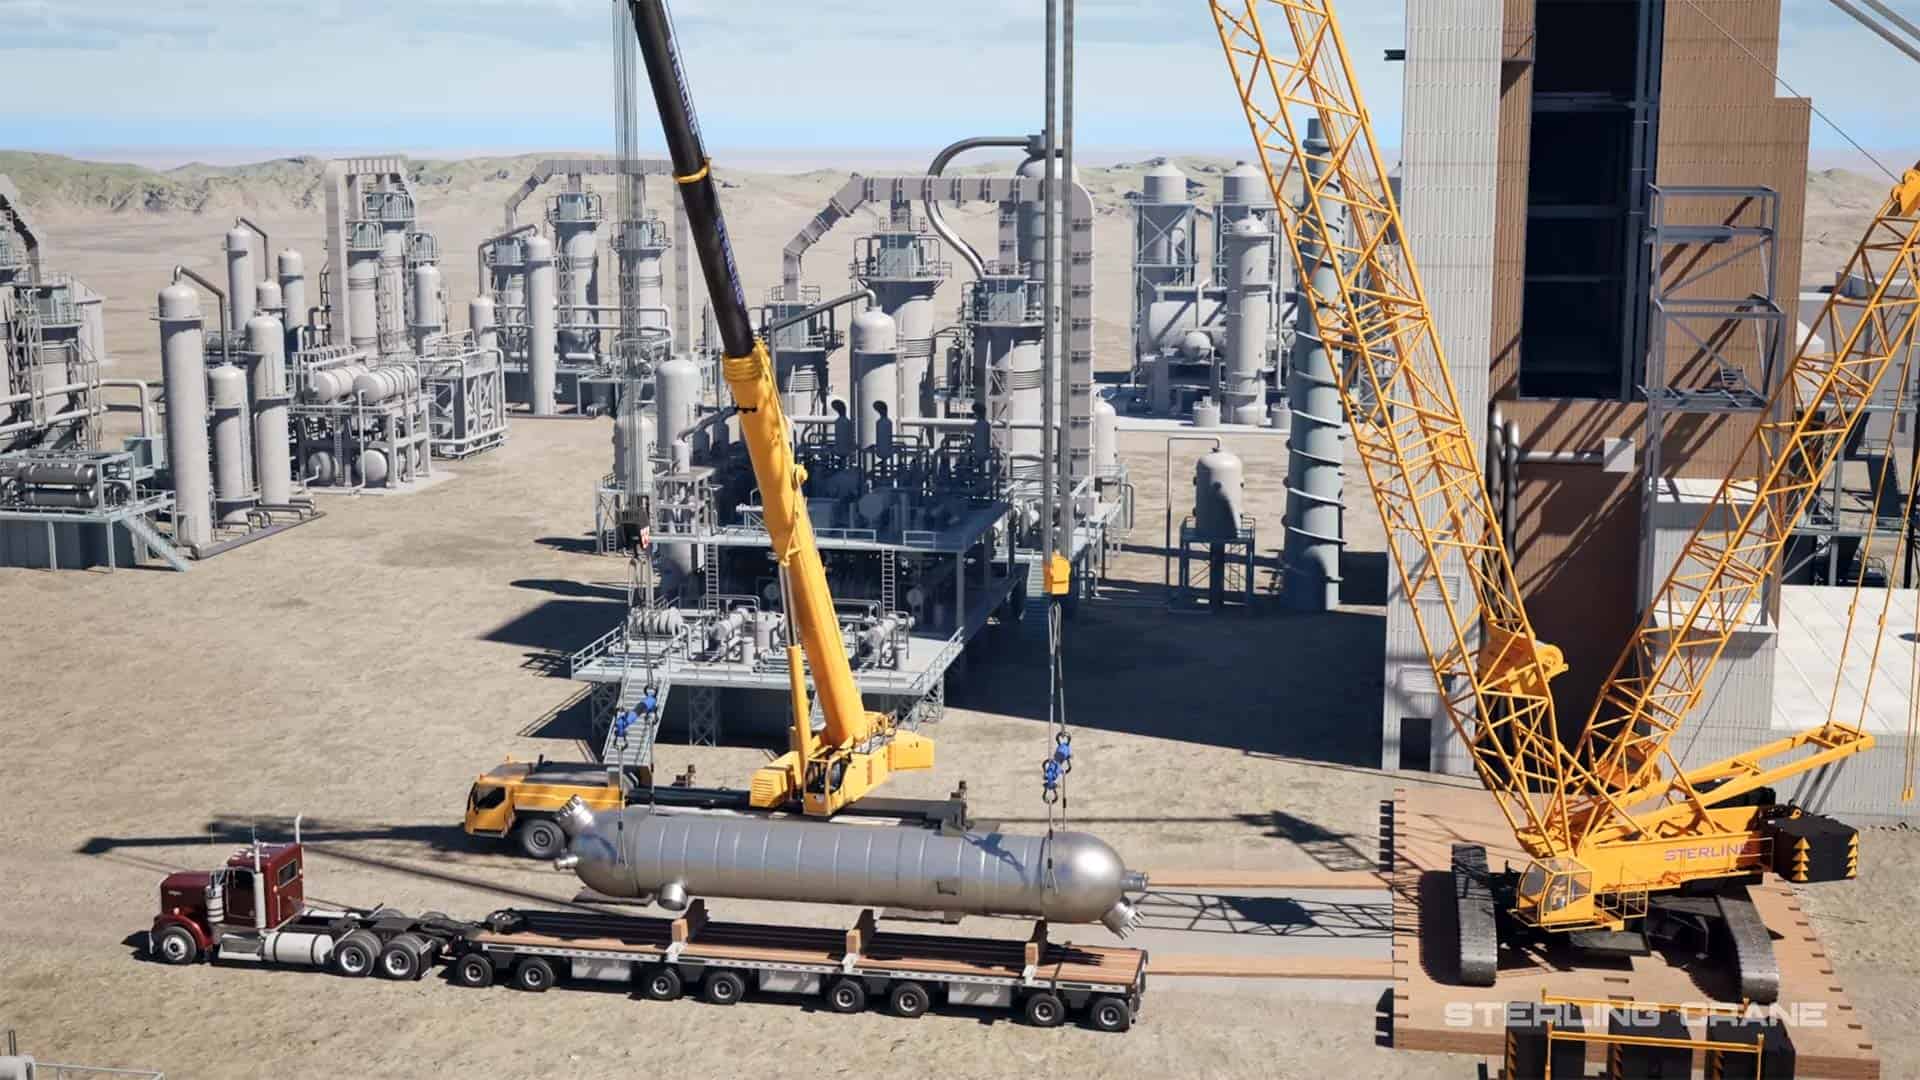 Industrial 3D Animation of a Heavy Crane